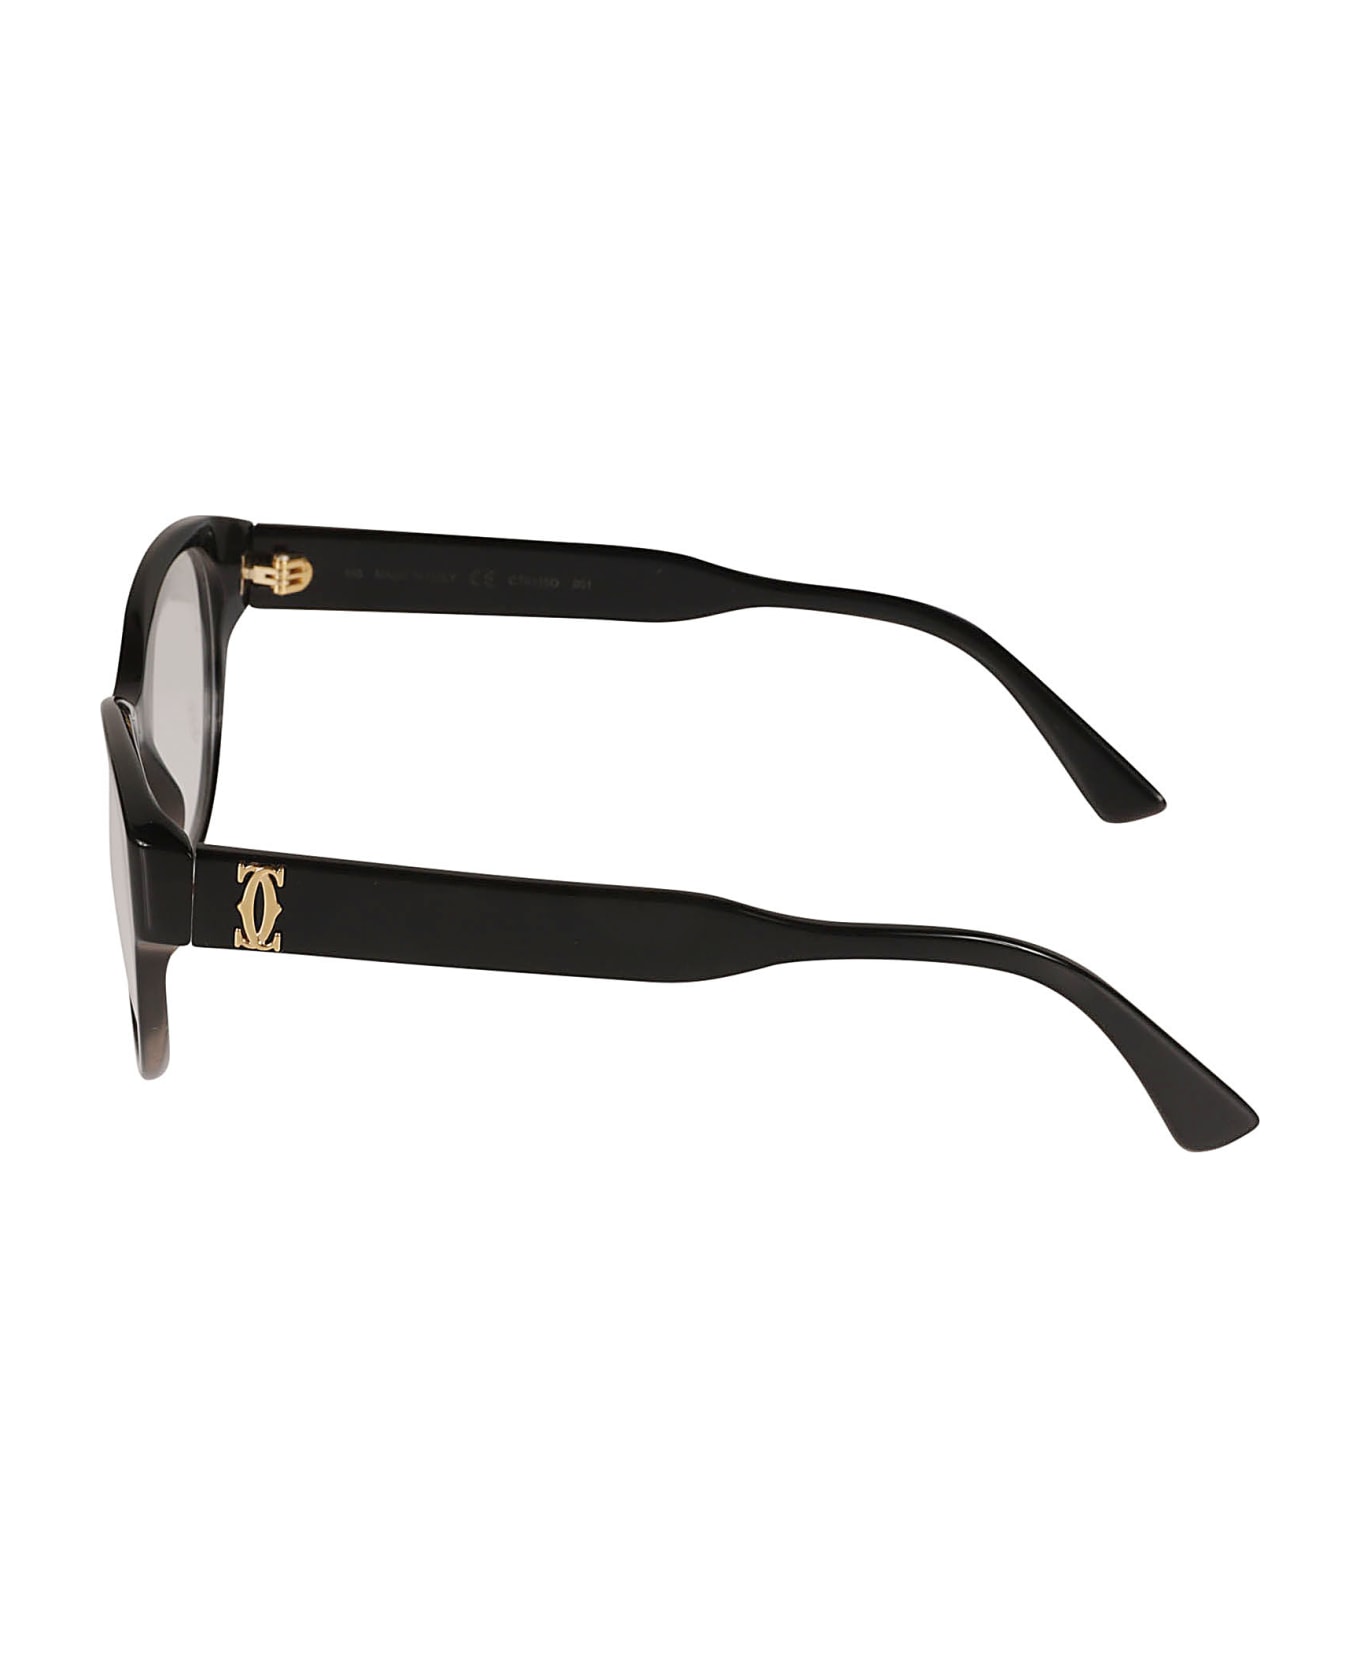 Cartier Eyewear Signature Double C Detail Glasses - 001 sunglasses ISSIMO JVN